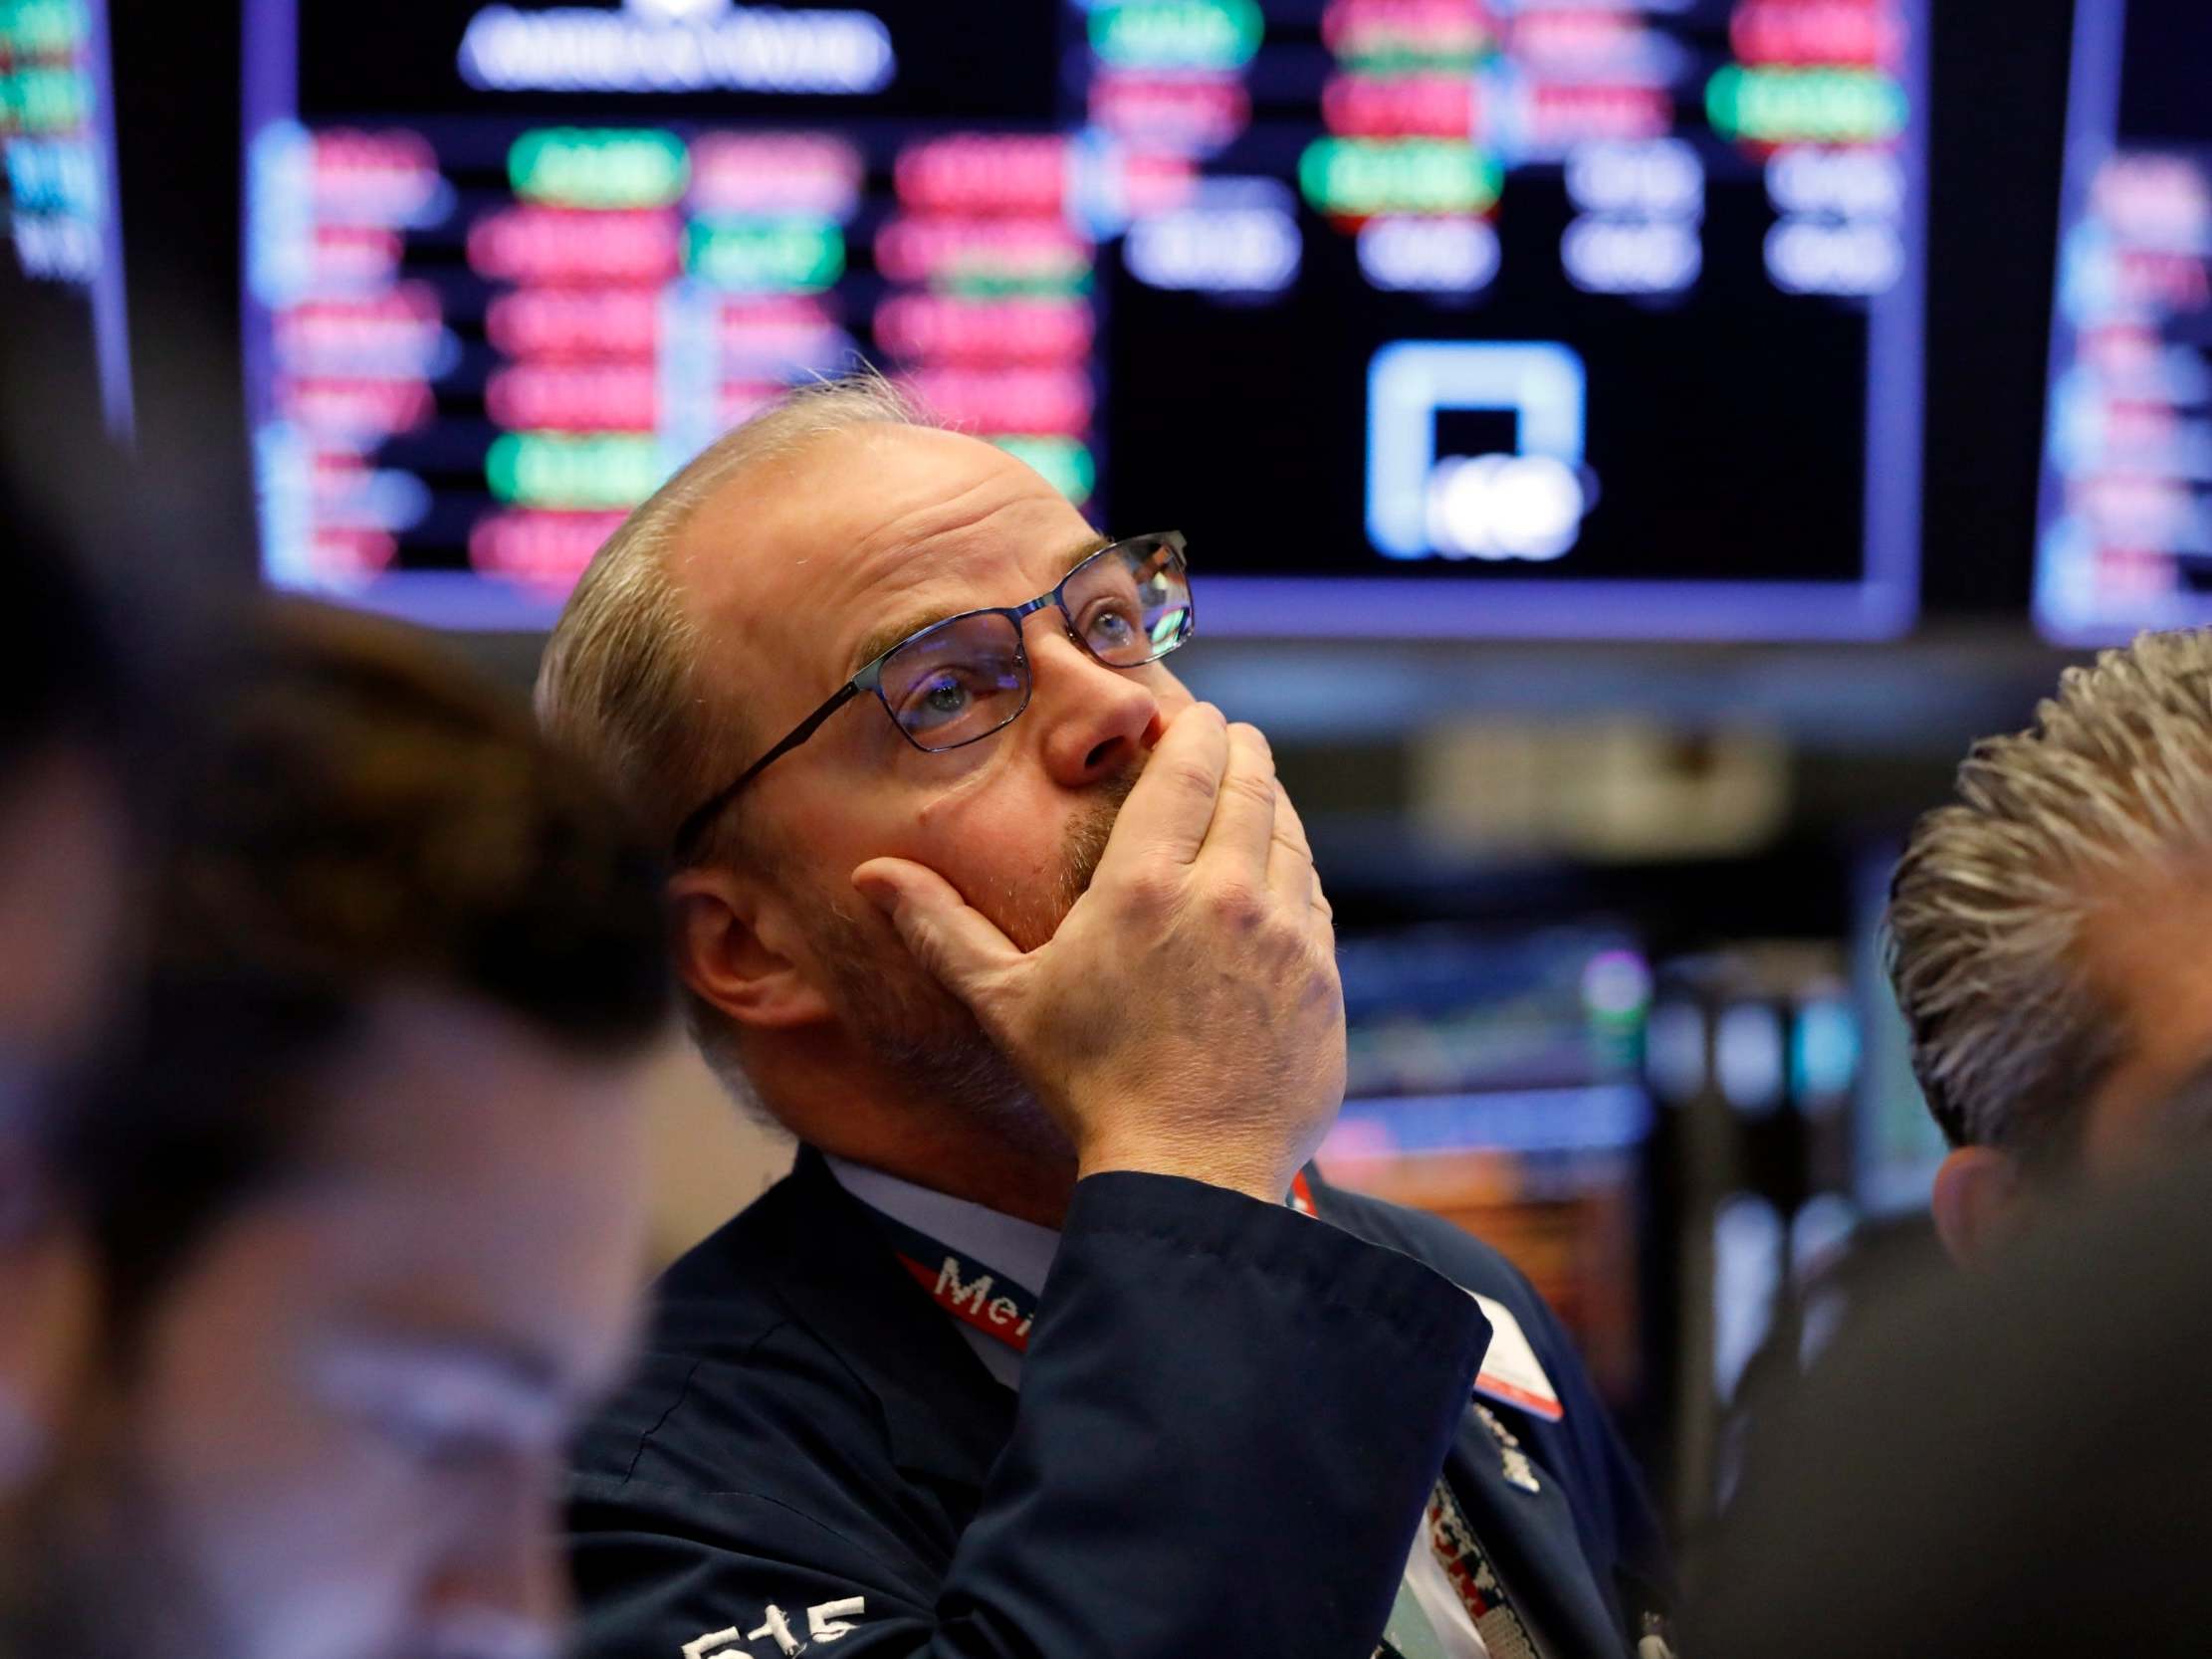 A trader on the floor of the New York Stock Exchange on Friday